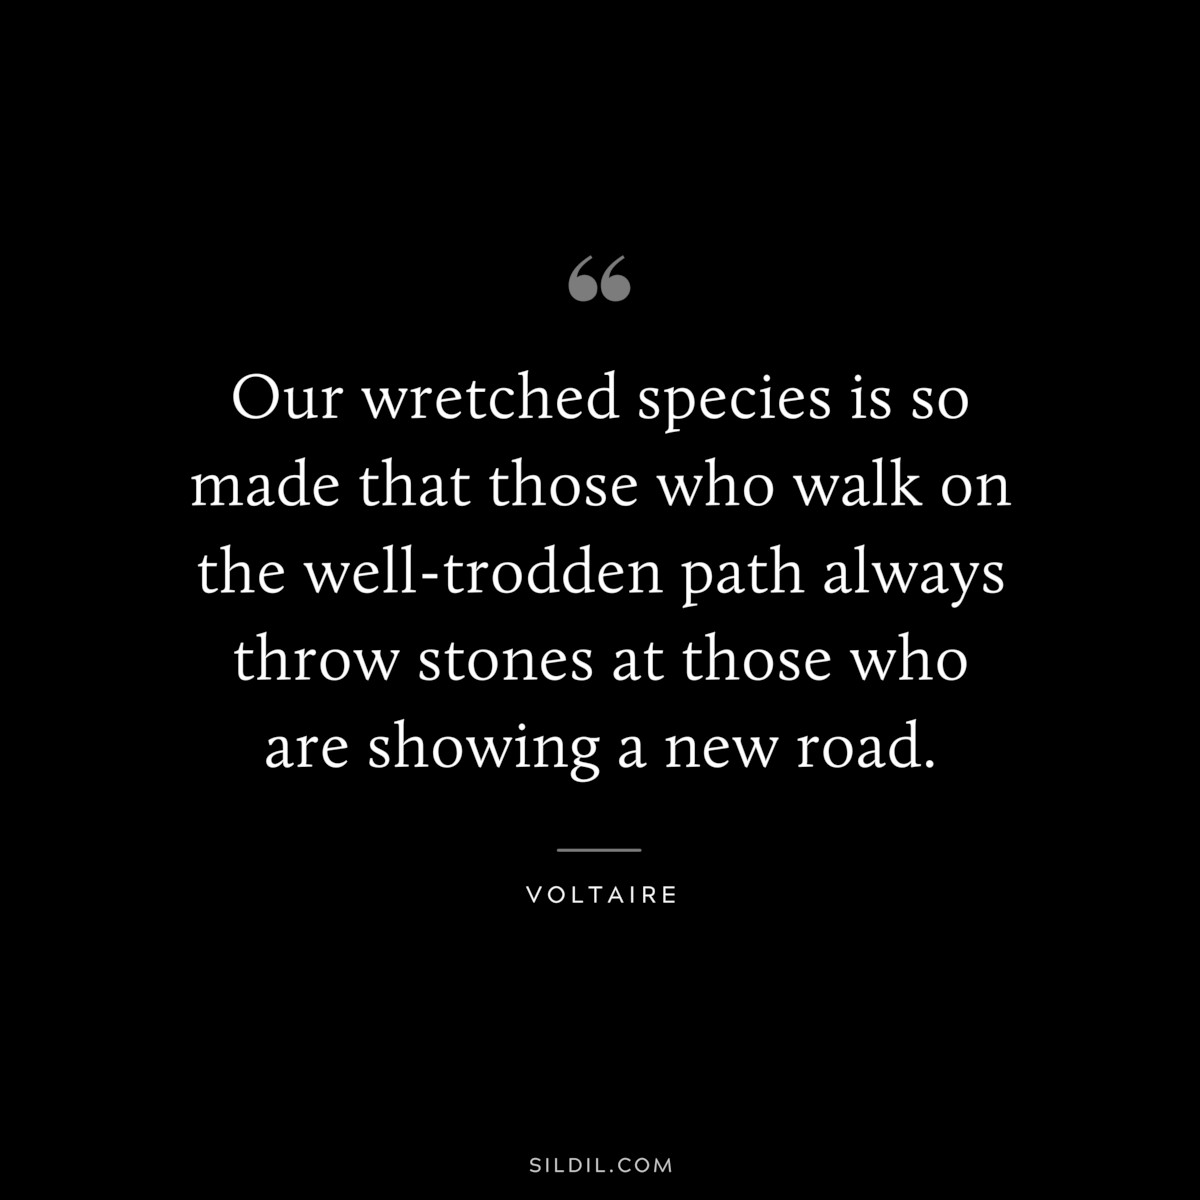 Our wretched species is so made that those who walk on the well-trodden path always throw stones at those who are showing a new road. ― Voltaire